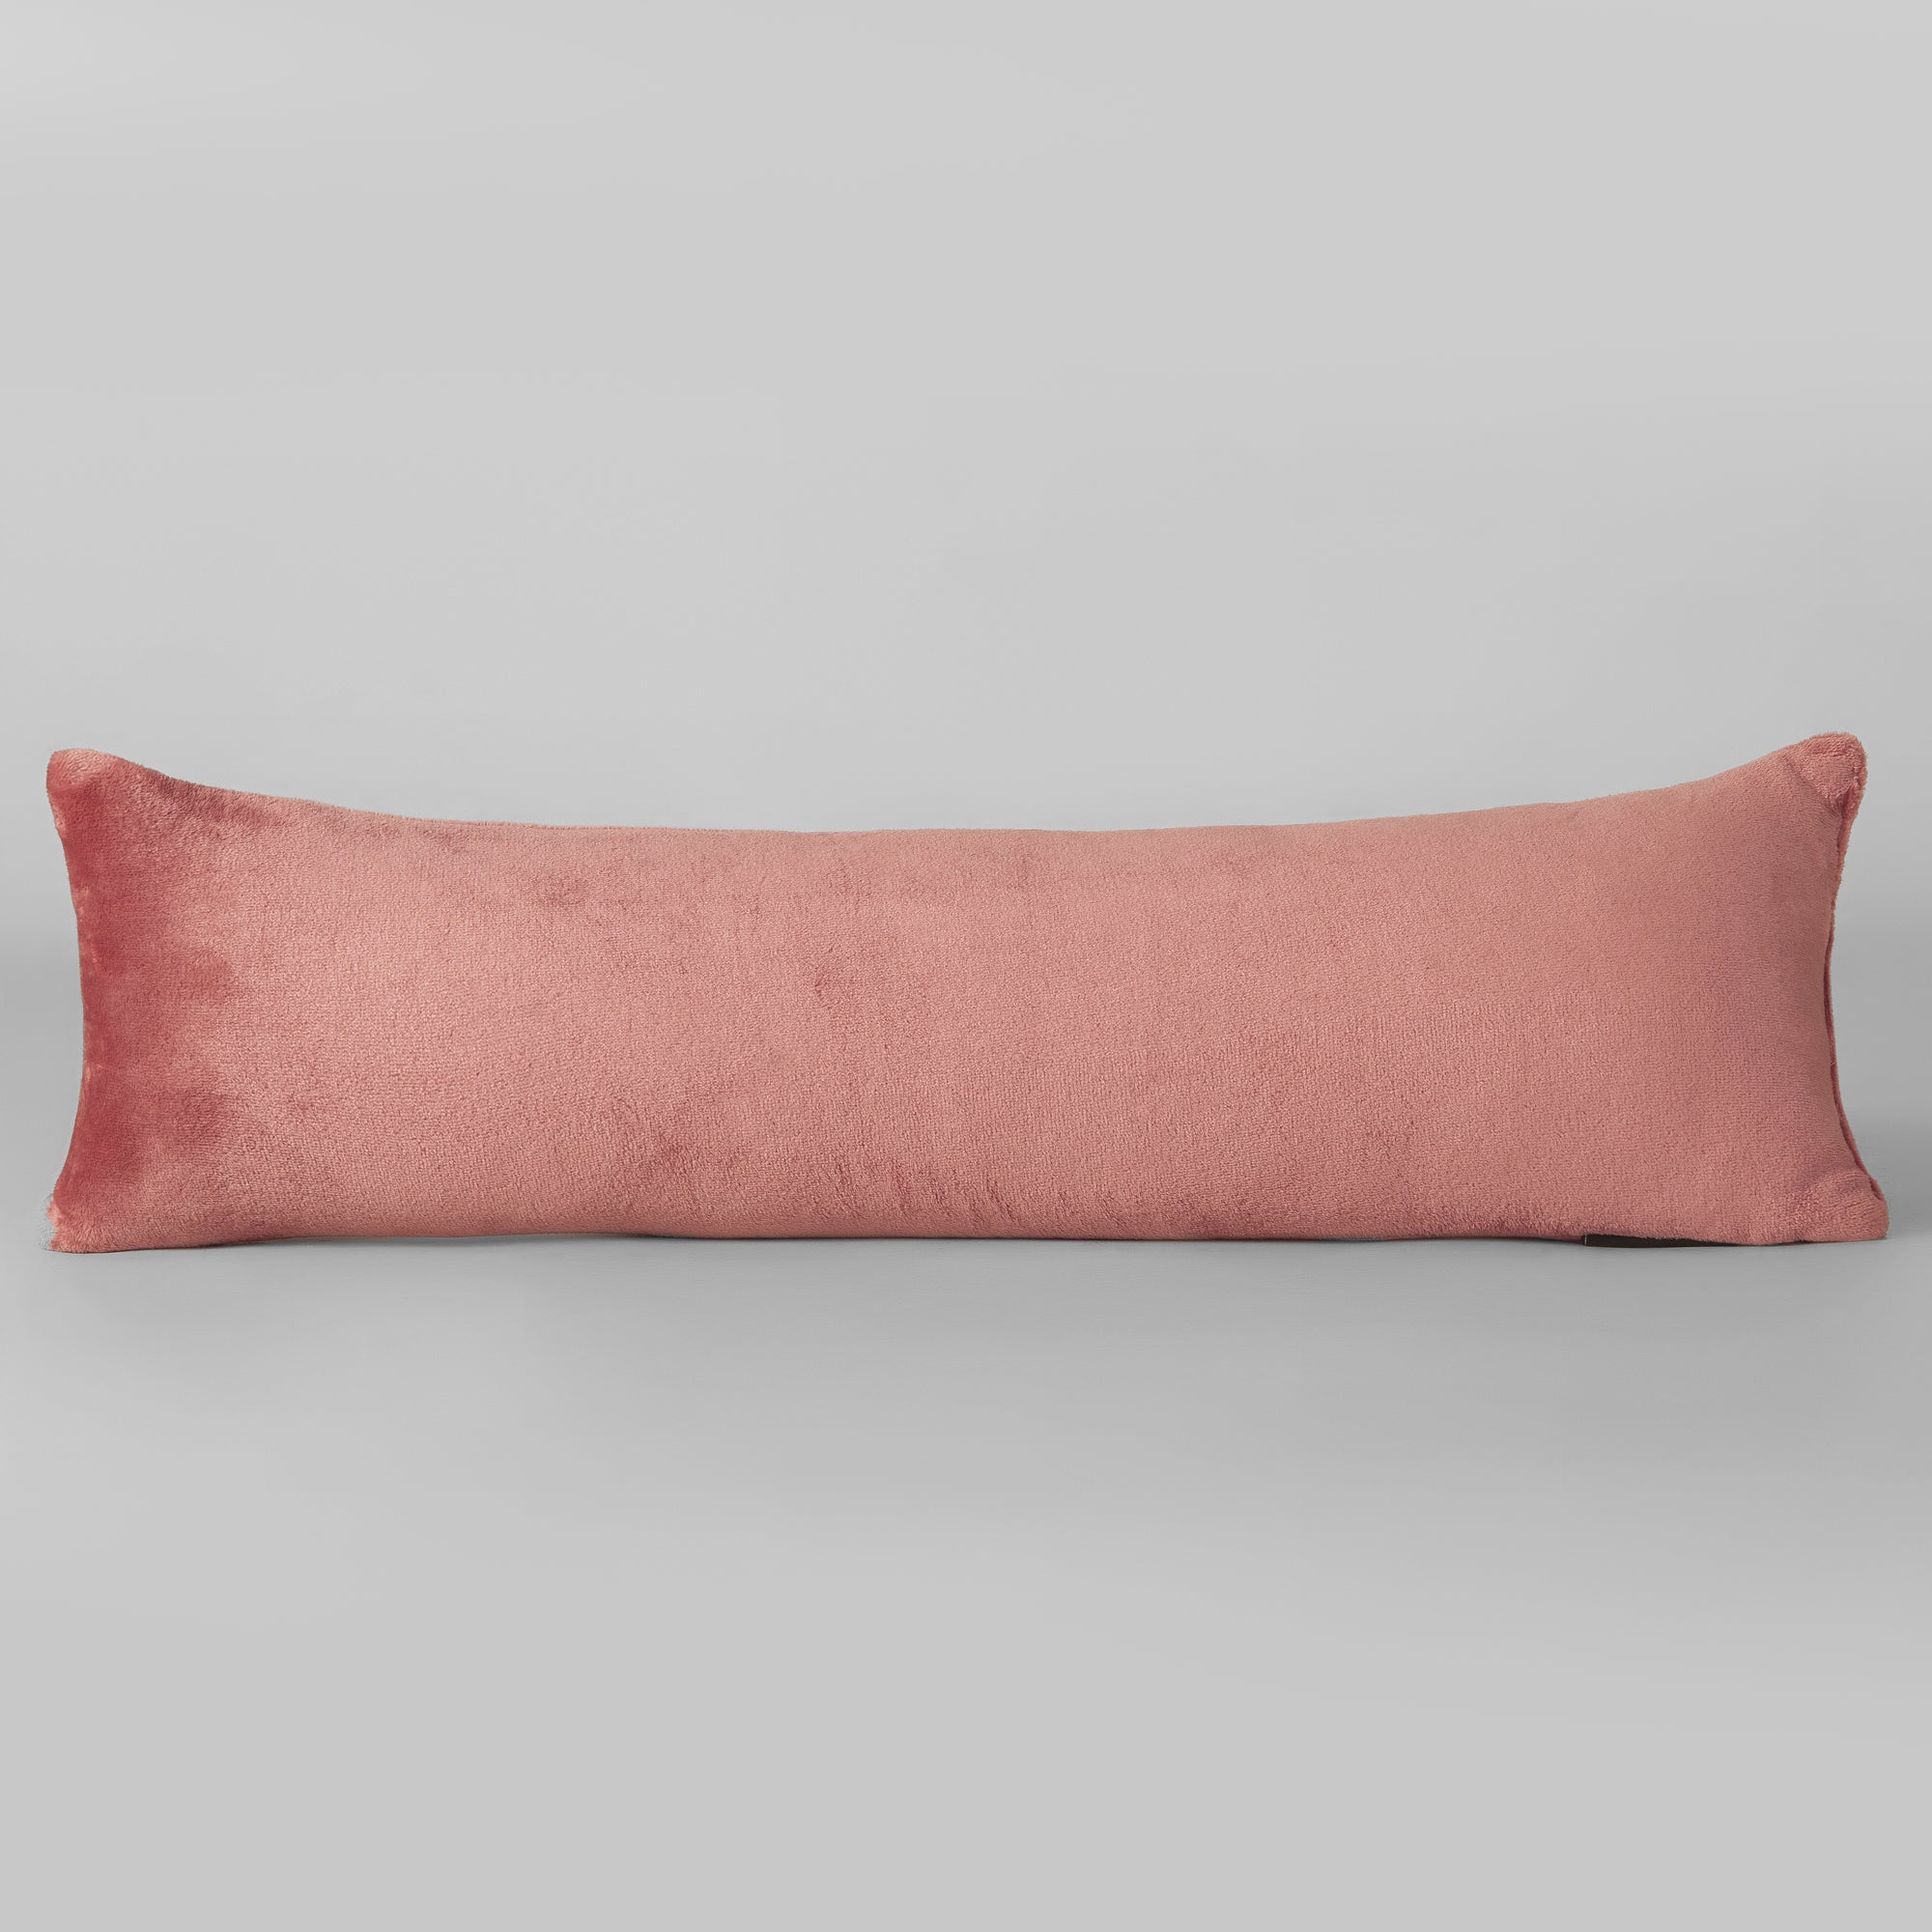 The Linen Company Accessories Accent Dusty Rose Plush Cushion